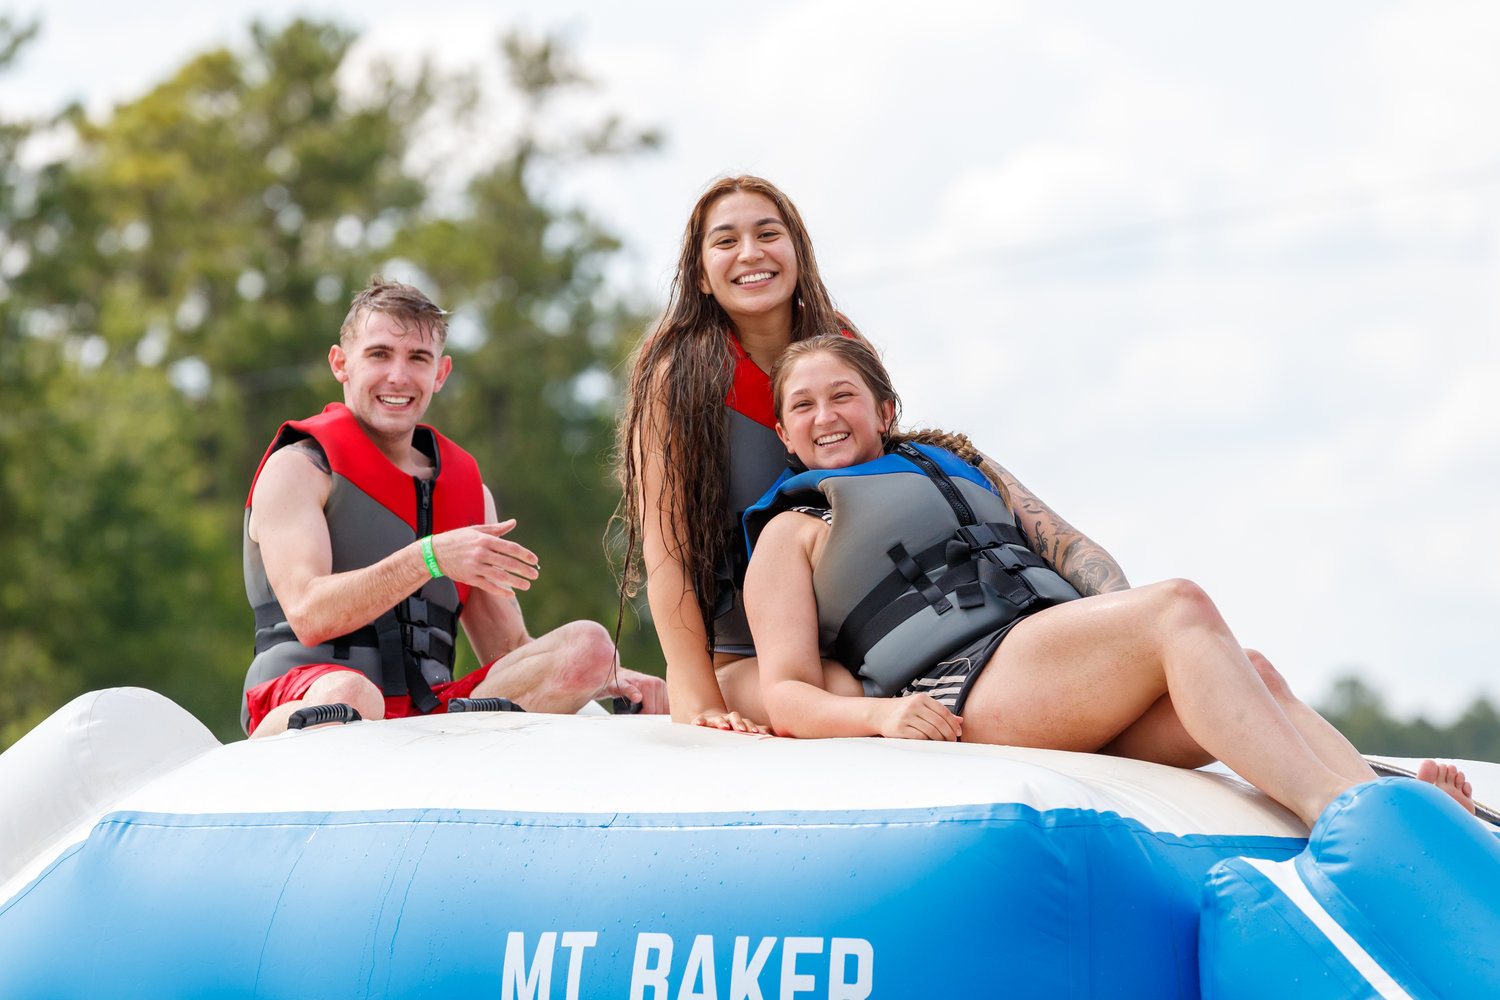 Nathan Grassie, Cynthia Vanegas and Merrisa Summers prepare to slide into the water at Smith Lake.